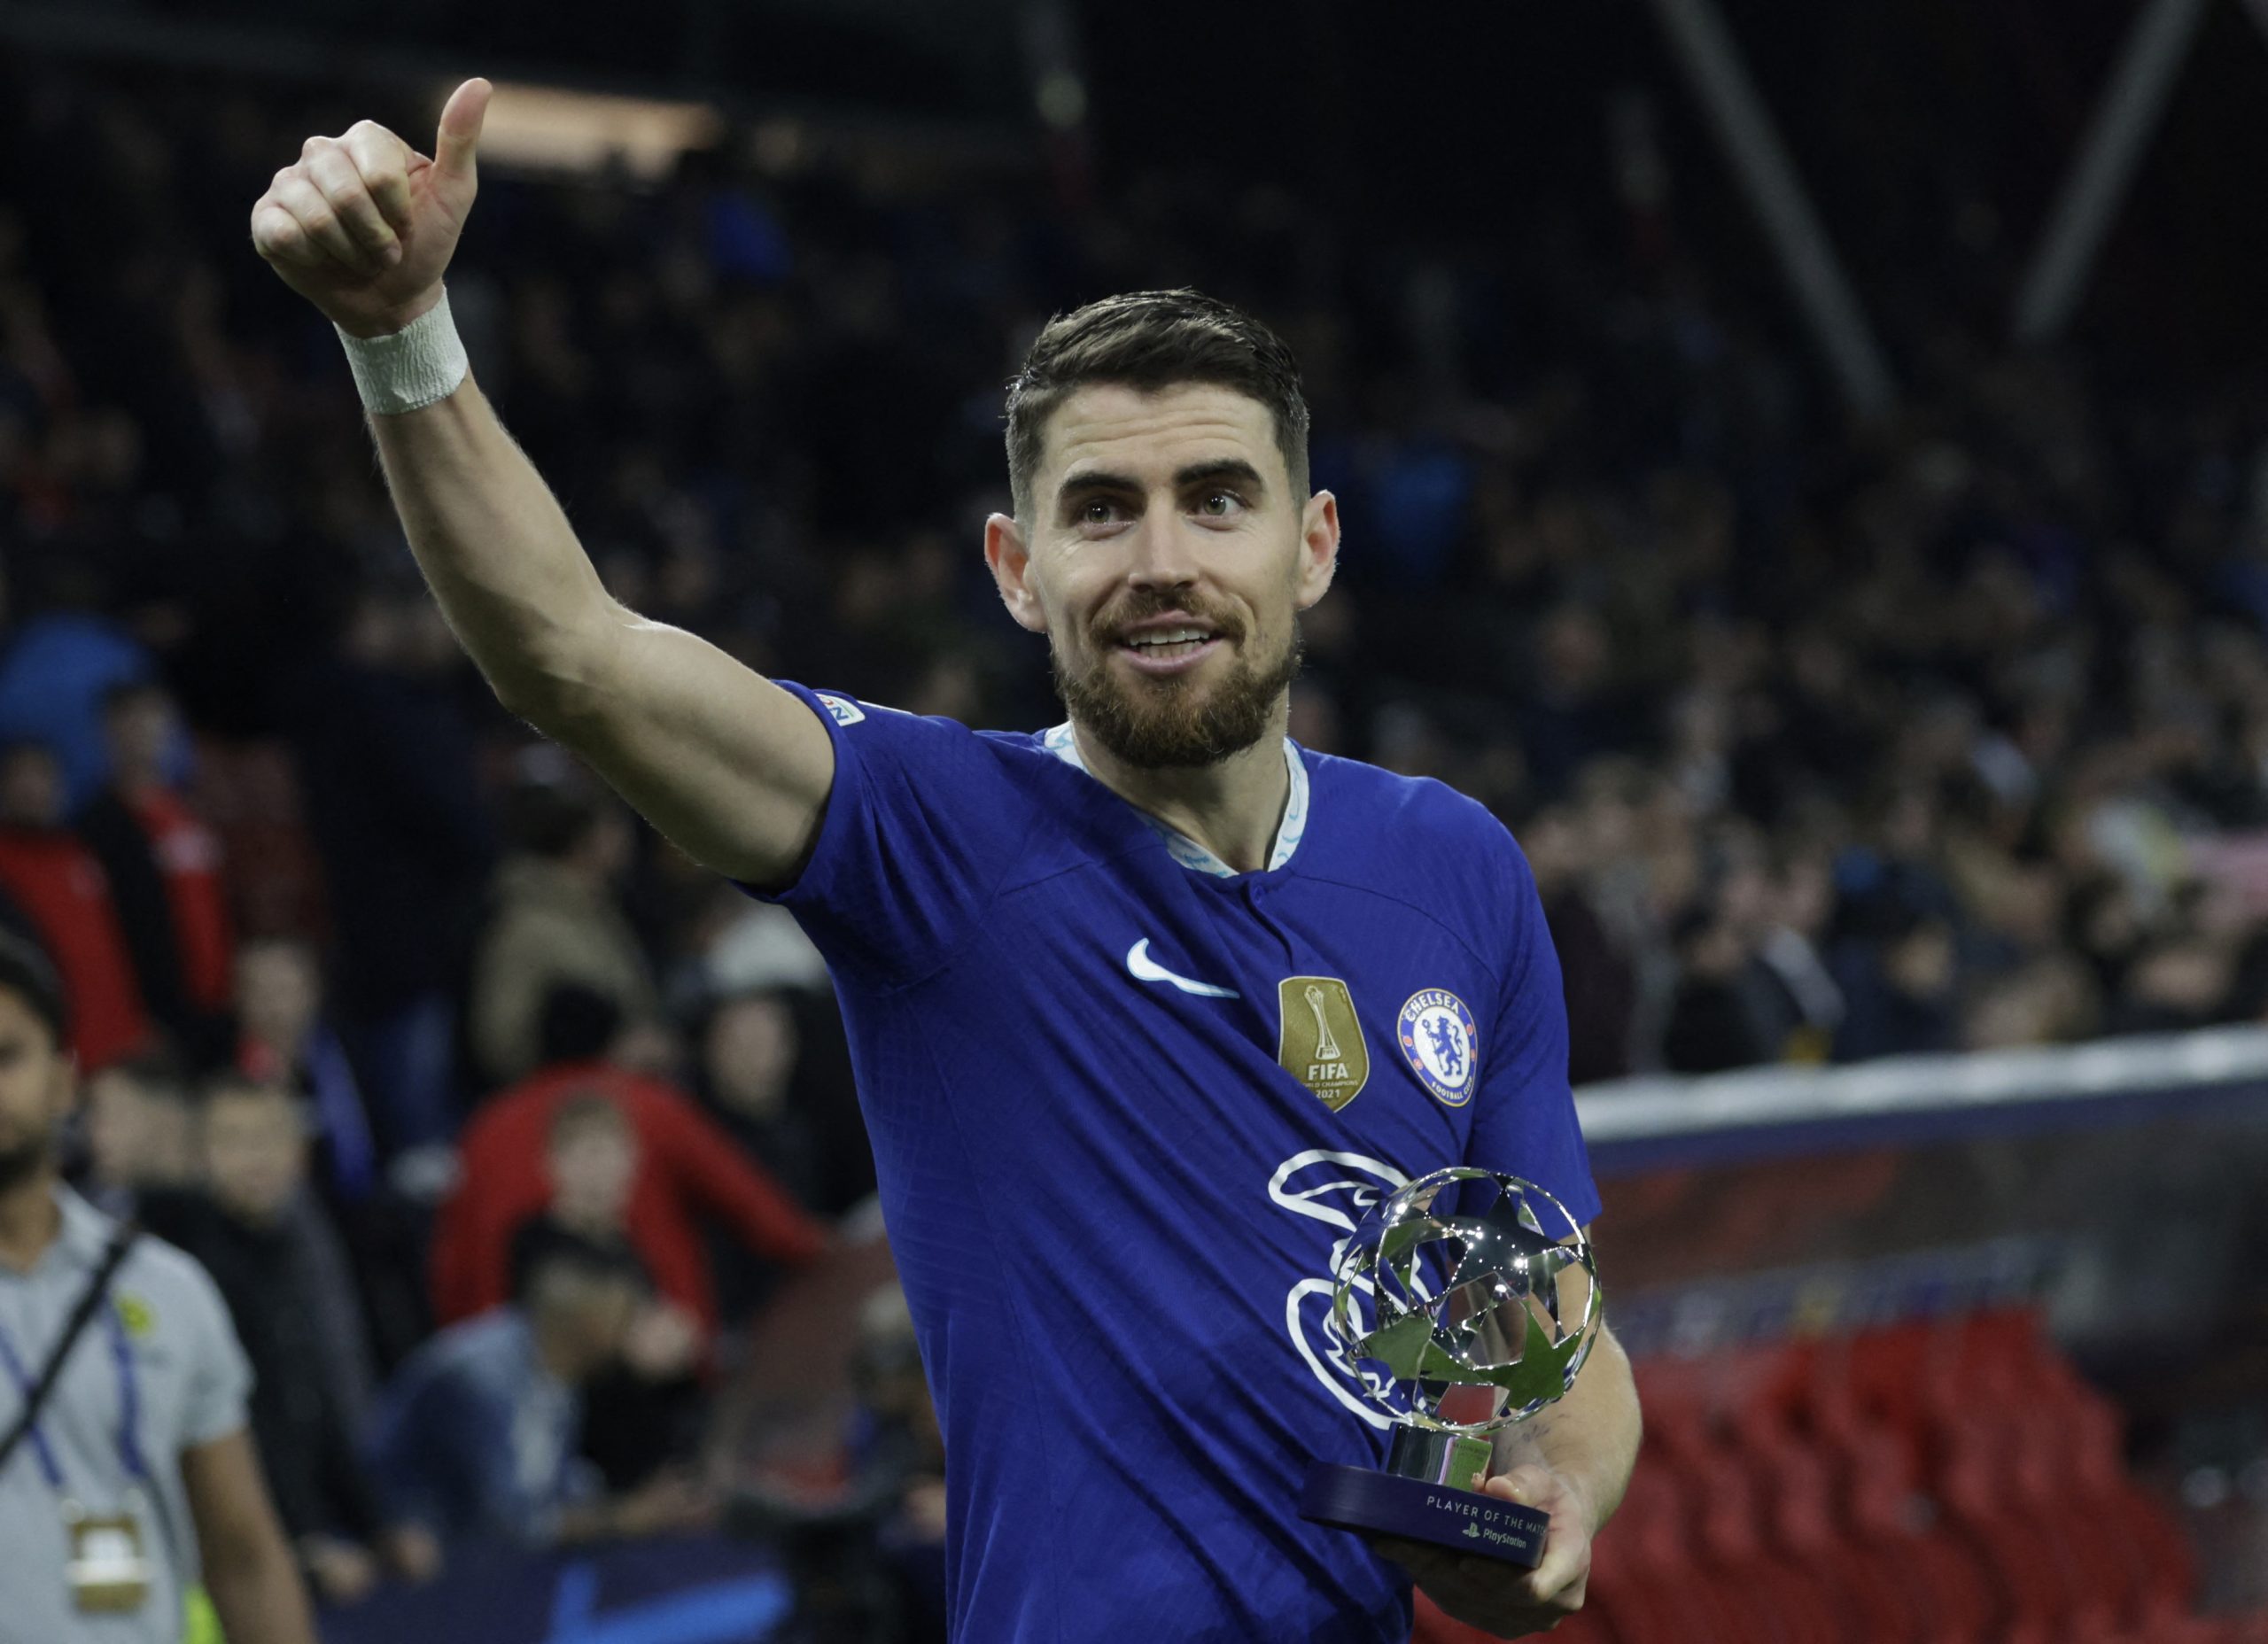 Chelsea's Jorginho celebrates with the player of the match trophy after the match